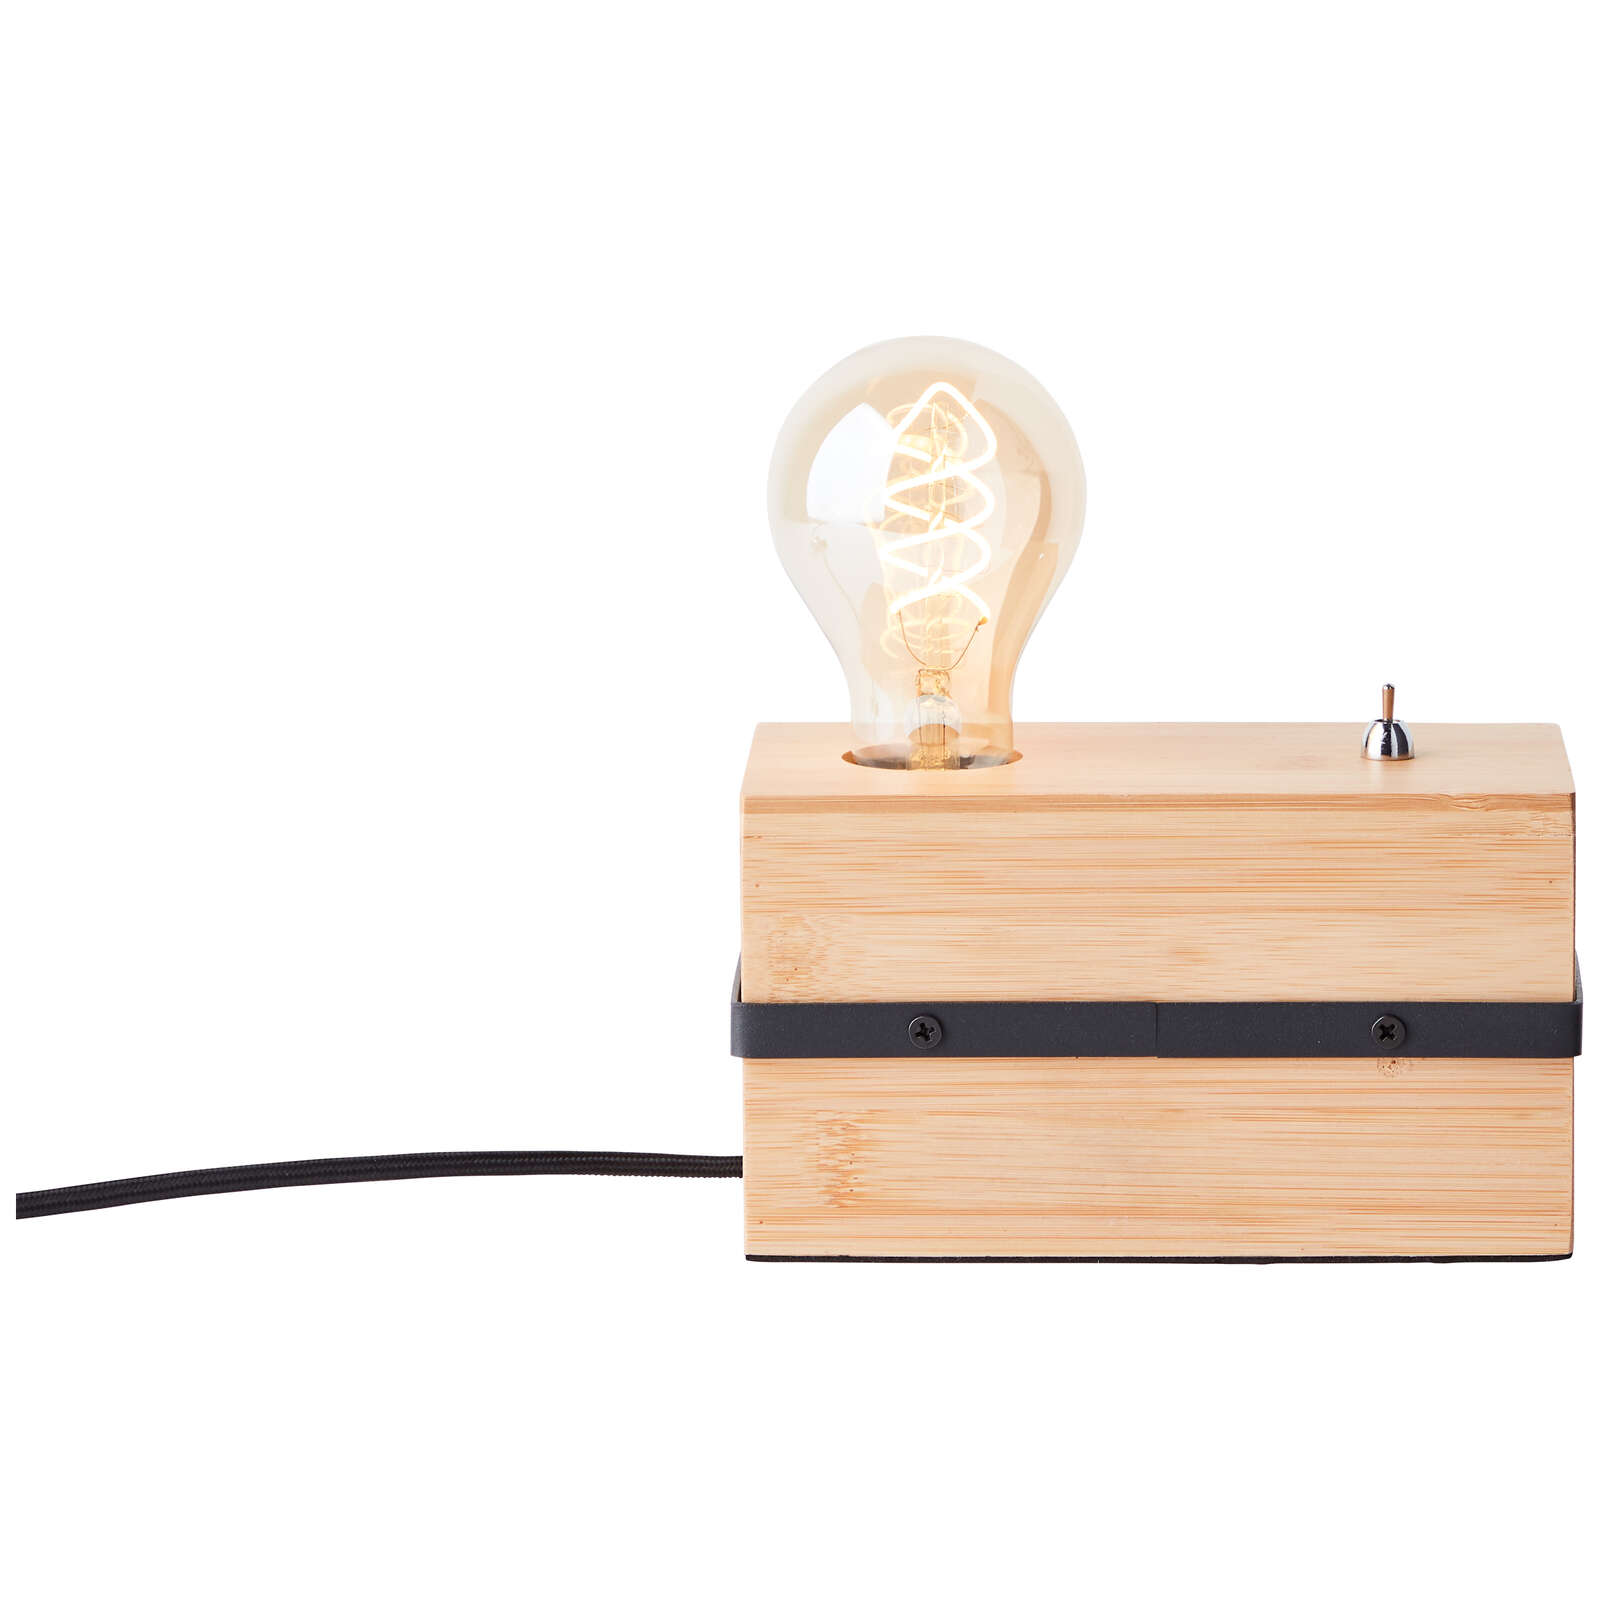             Wooden table lamp - Bea 1 - Brown
        